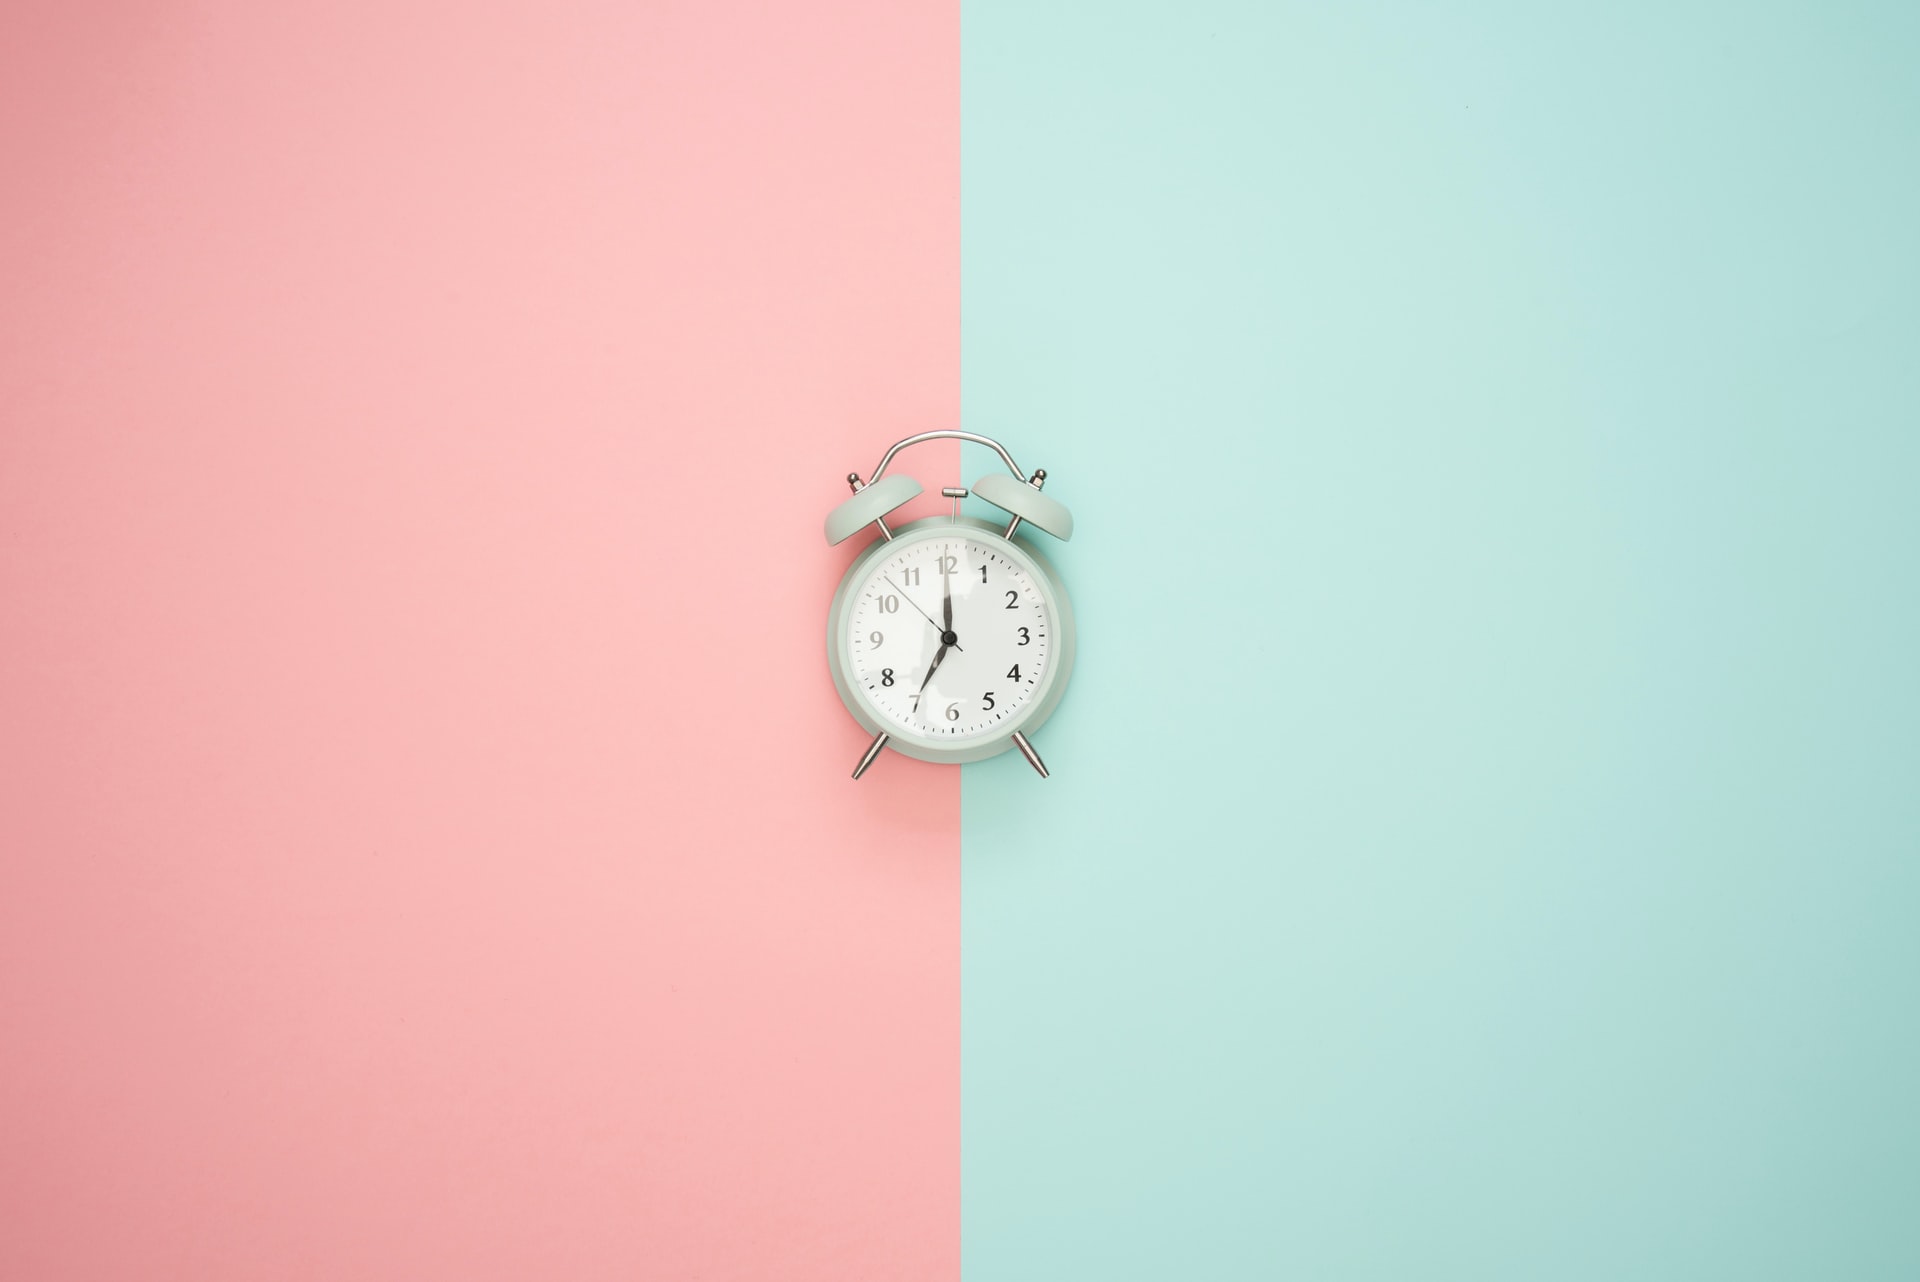 Light pink and blue background with alarm clock in centre